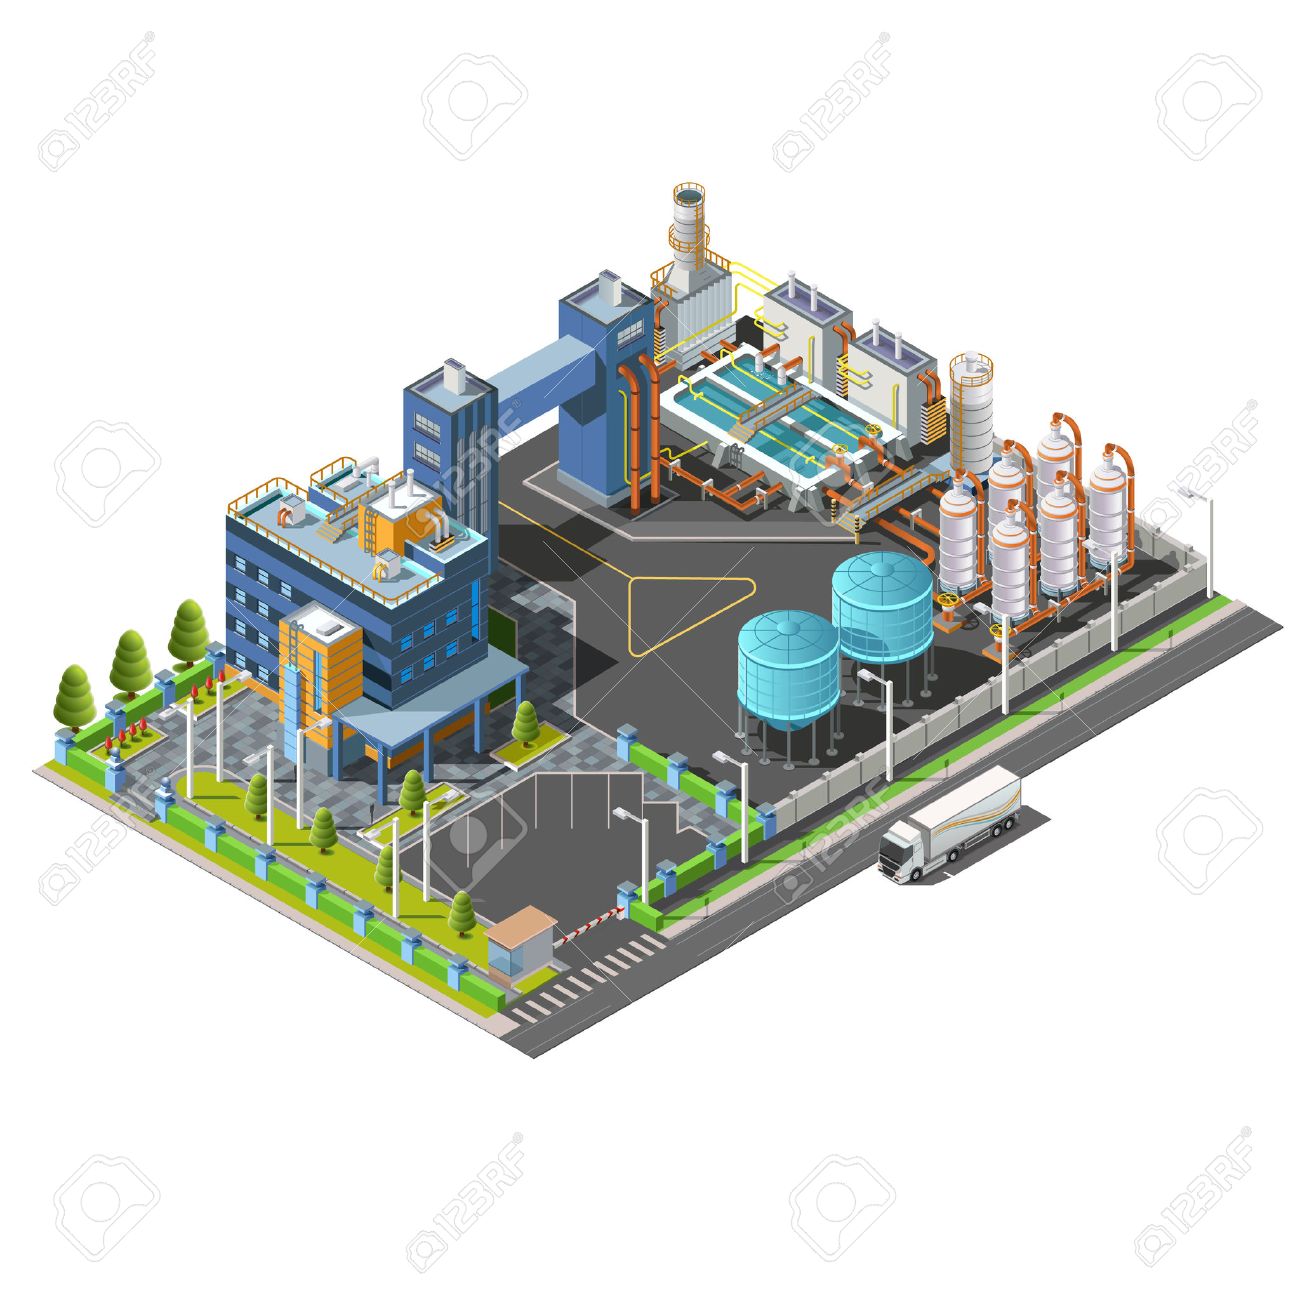 47555591-isometric-industrial-area-plant-hydroelectric-water-purifying-system-construction.jpg